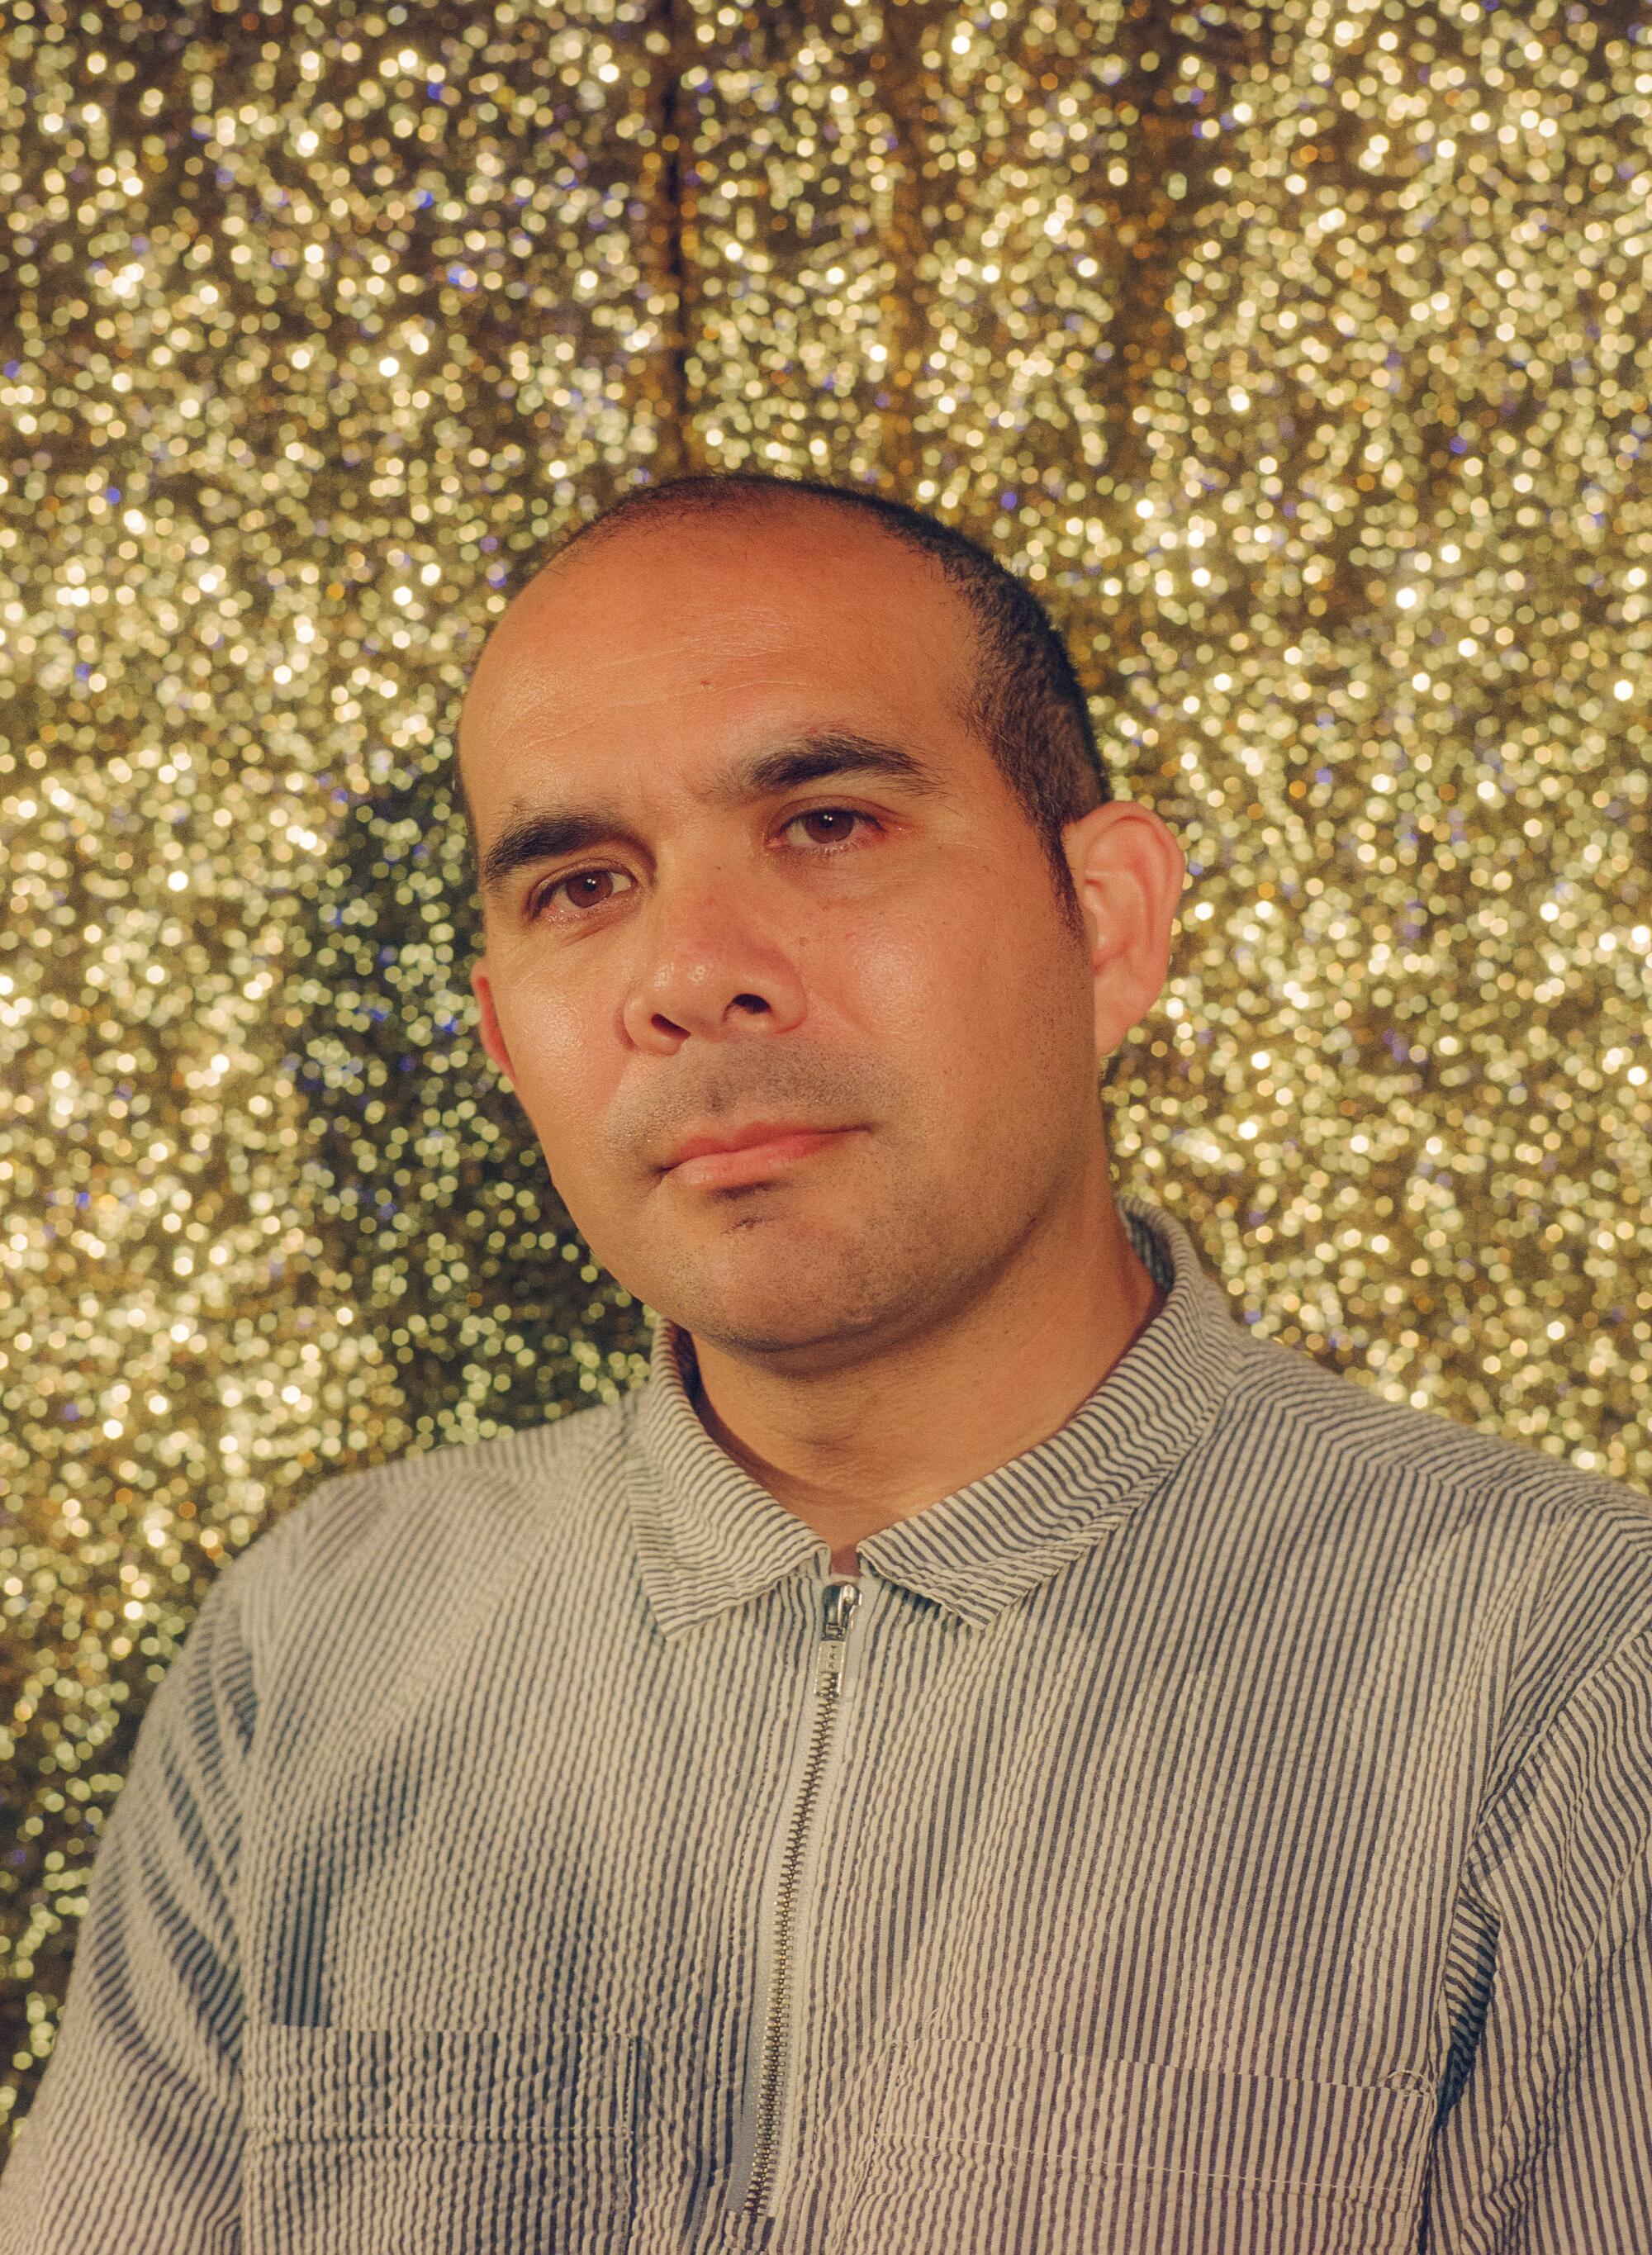 A man in a gray shirt poses in front of a golden curtain.